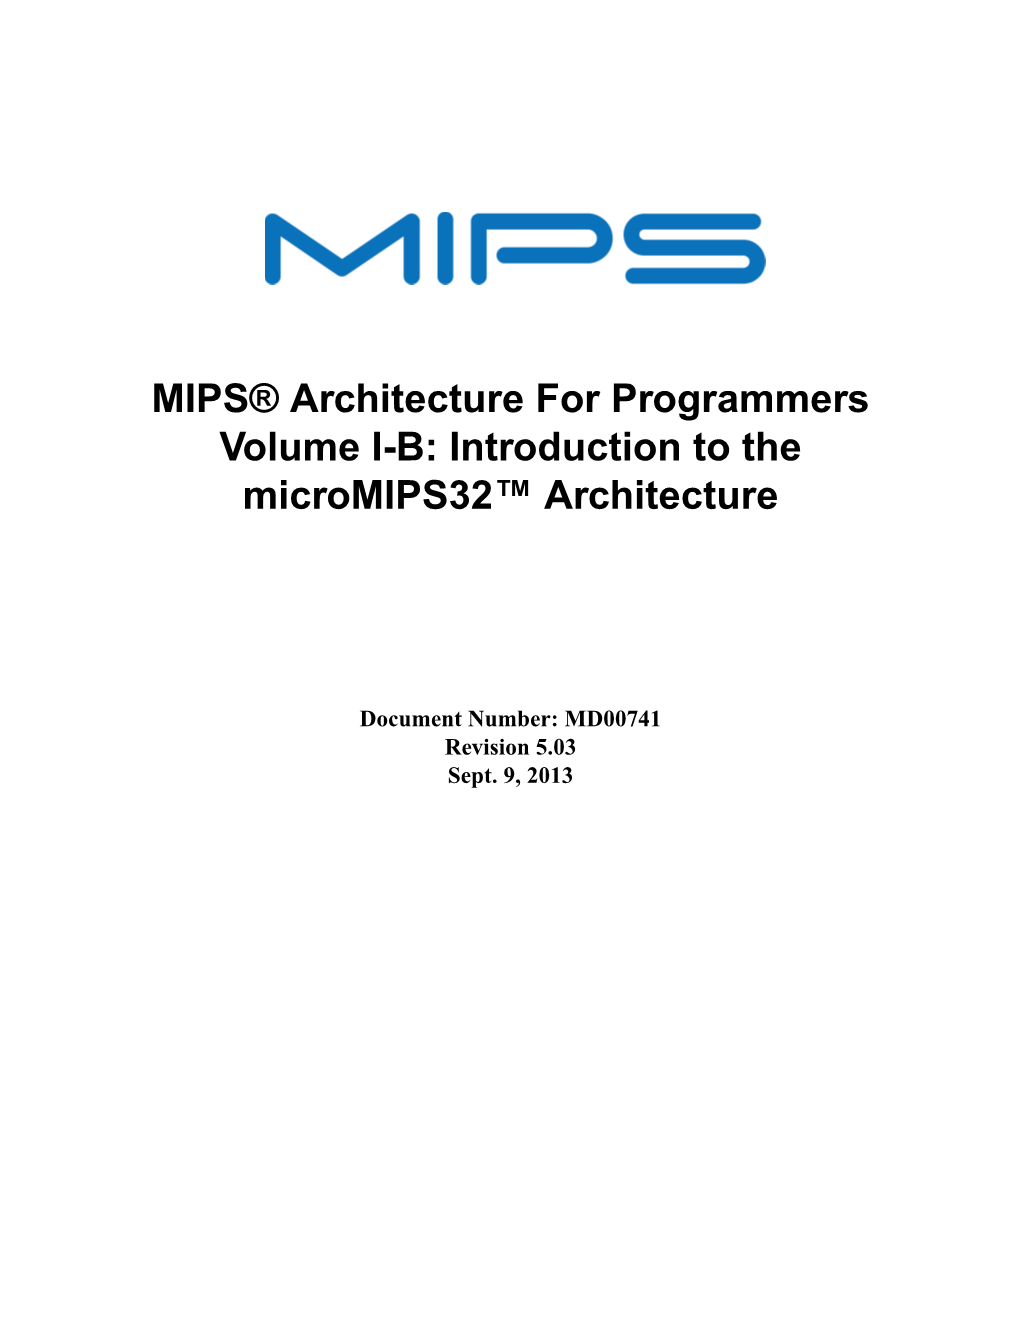 MIPS® Architecture for Programmers Volume I-B: Introduction to the Micromips32™ Architecture, Revision 5.03